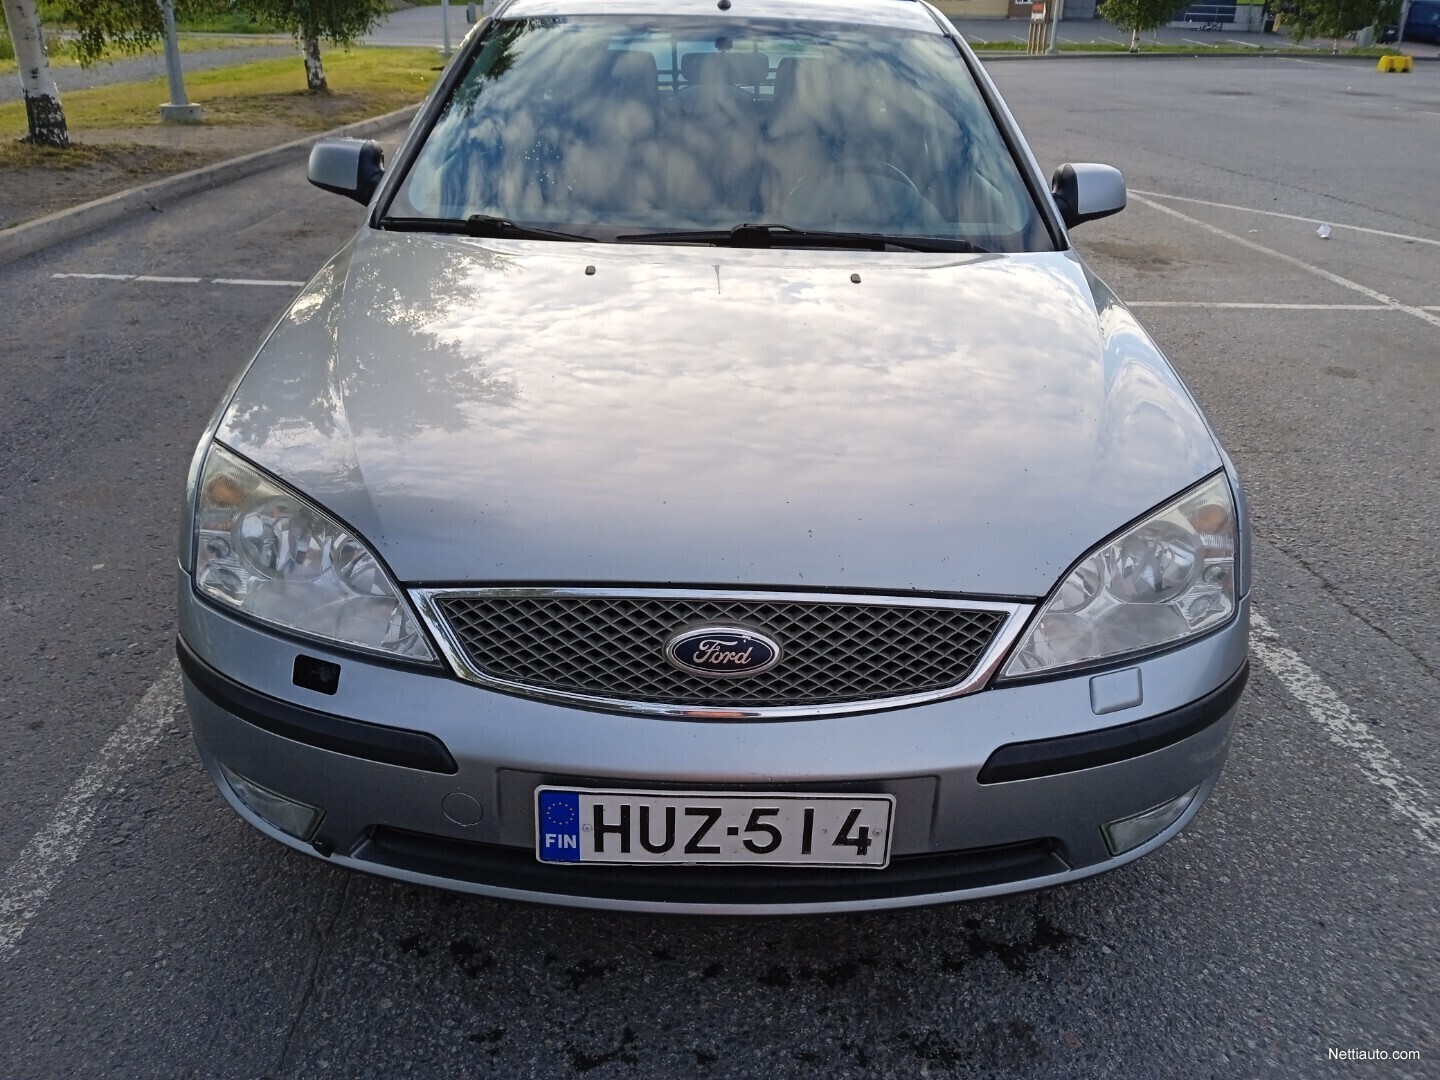 Ford Mondeo 1.8 re85 Station Wagon 2005 - Used vehicle - Nettiauto